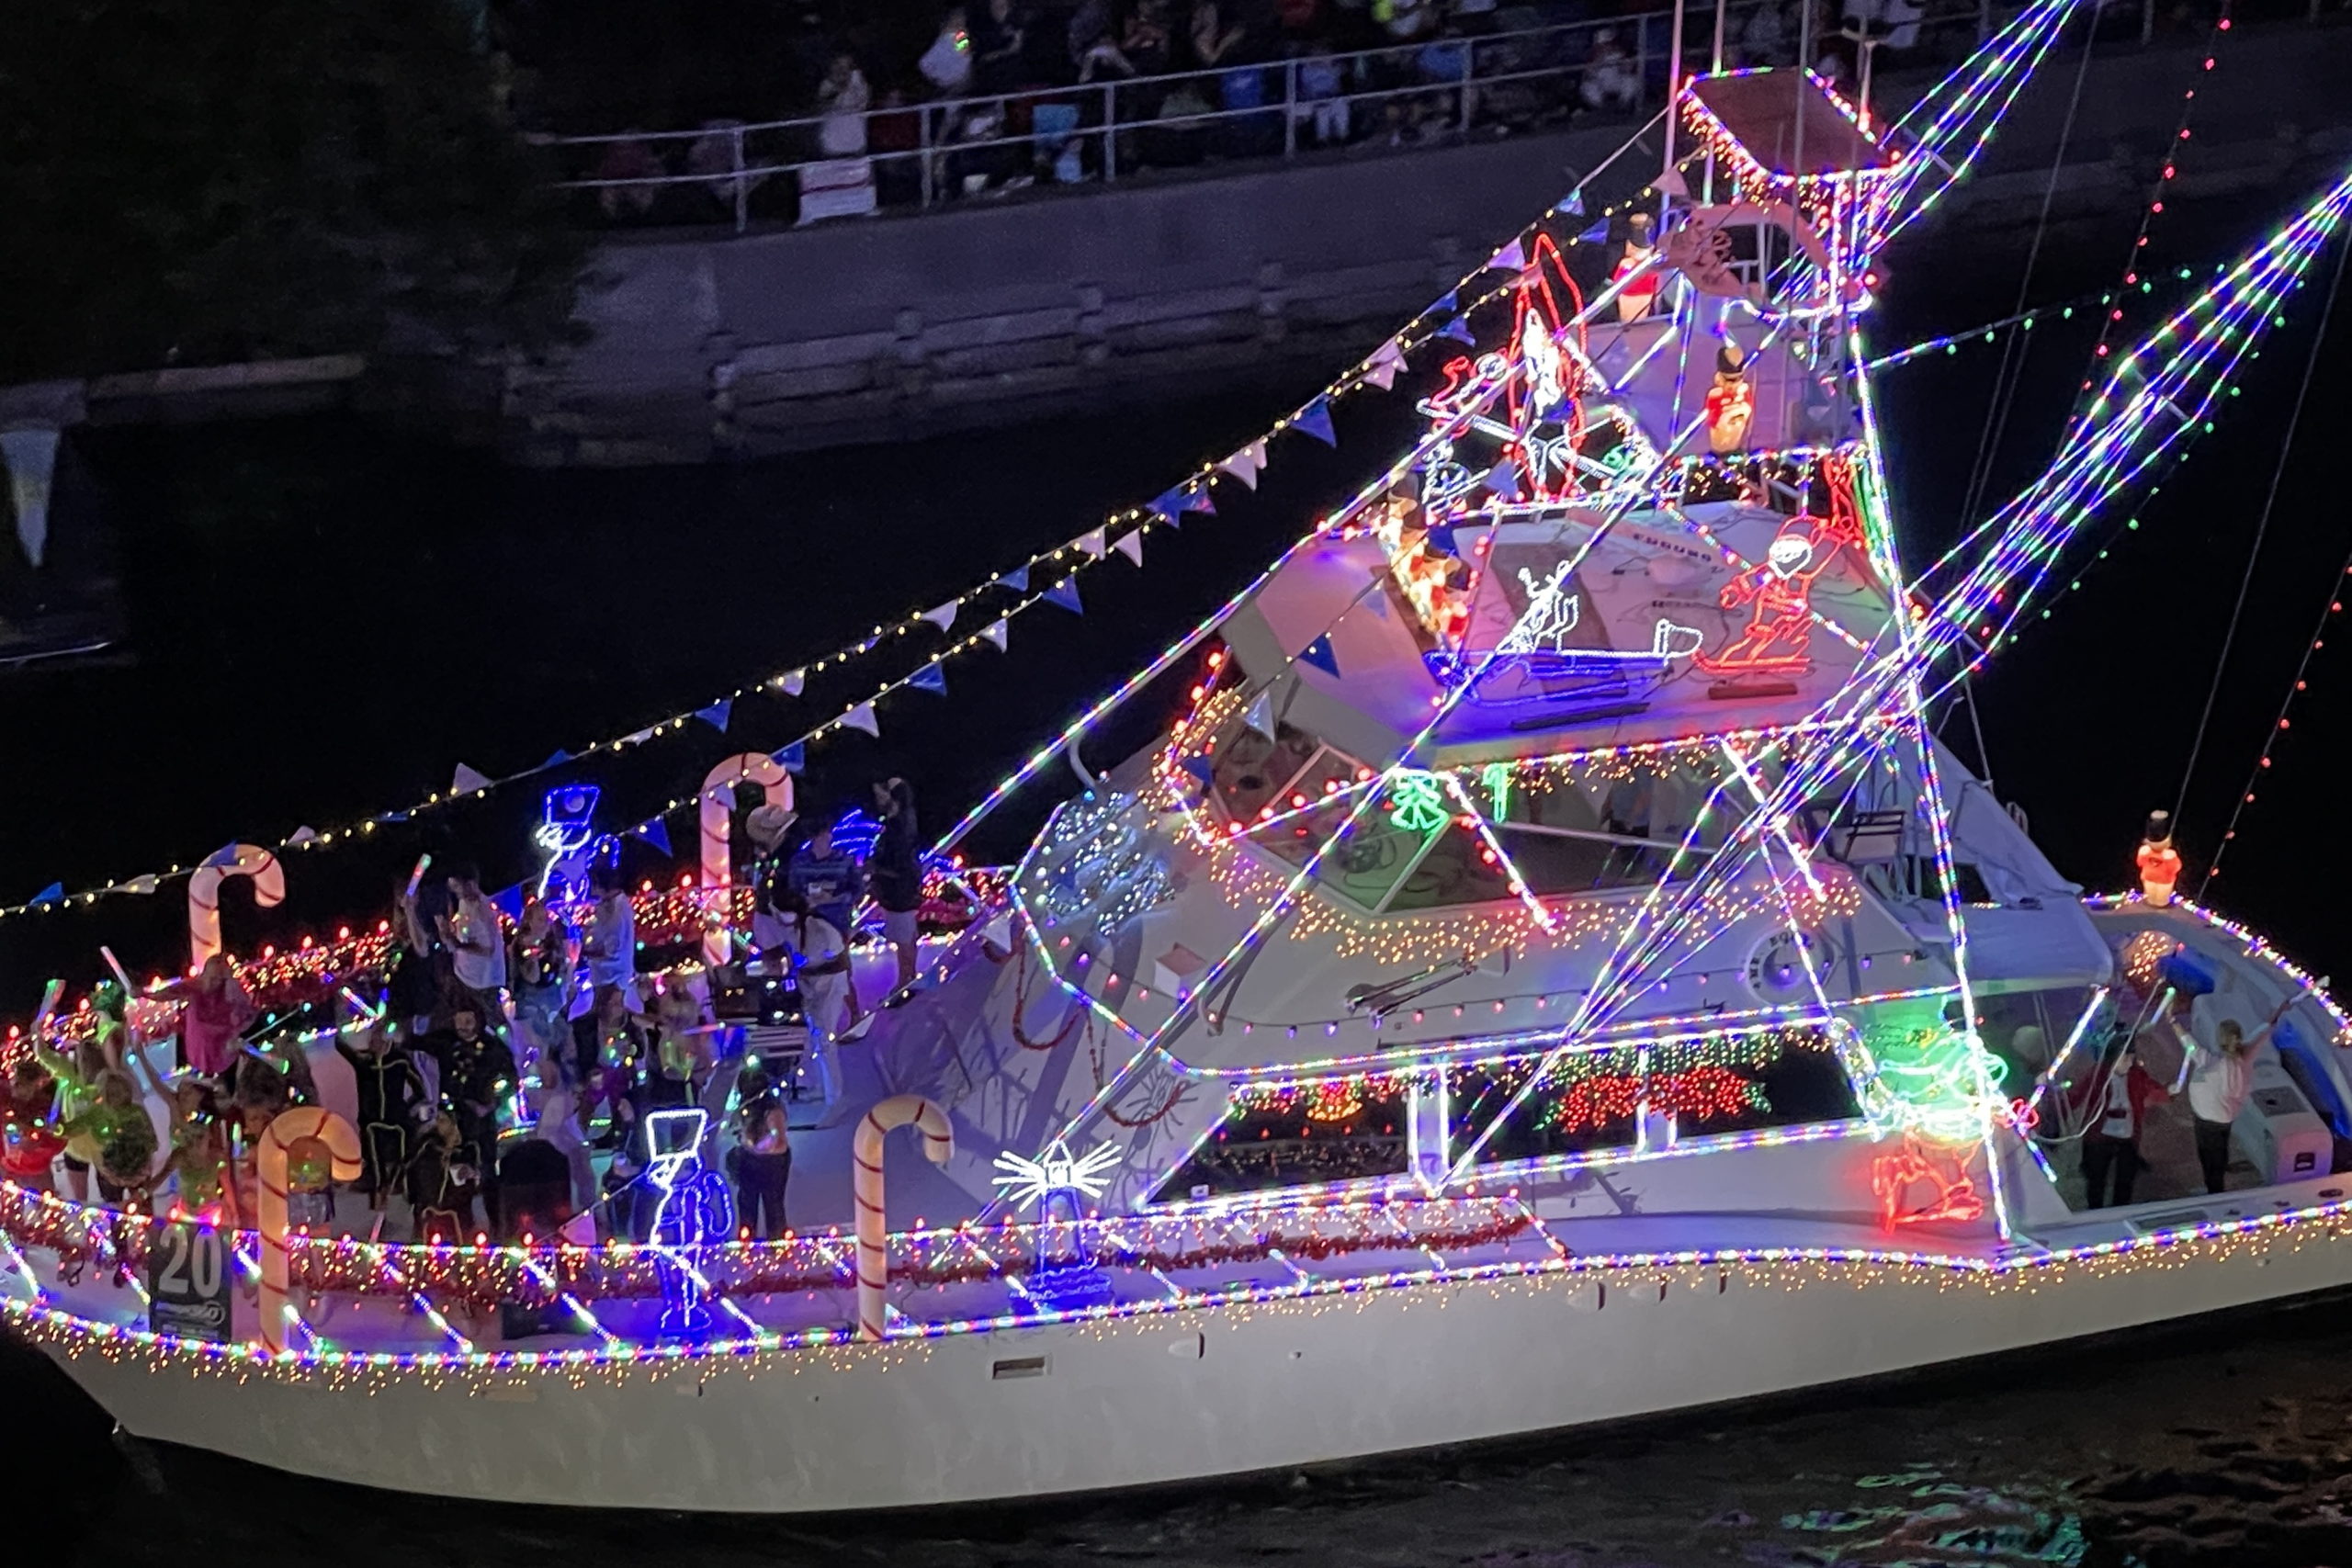 Mr. Bobb, boat number 20 in the 2022 Winterfest Boat Parade